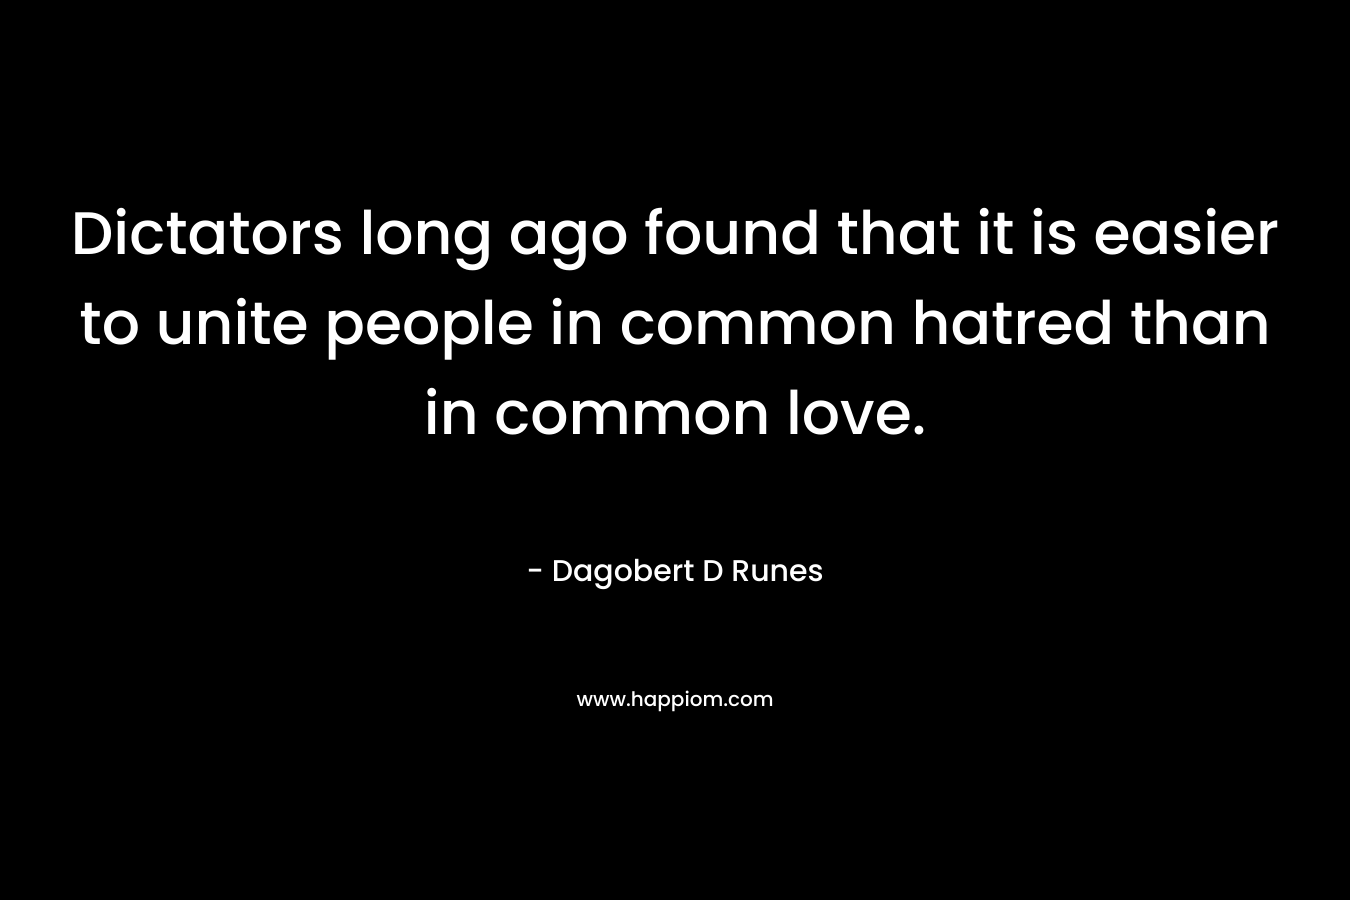 Dictators long ago found that it is easier to unite people in common hatred than in common love. – Dagobert D Runes